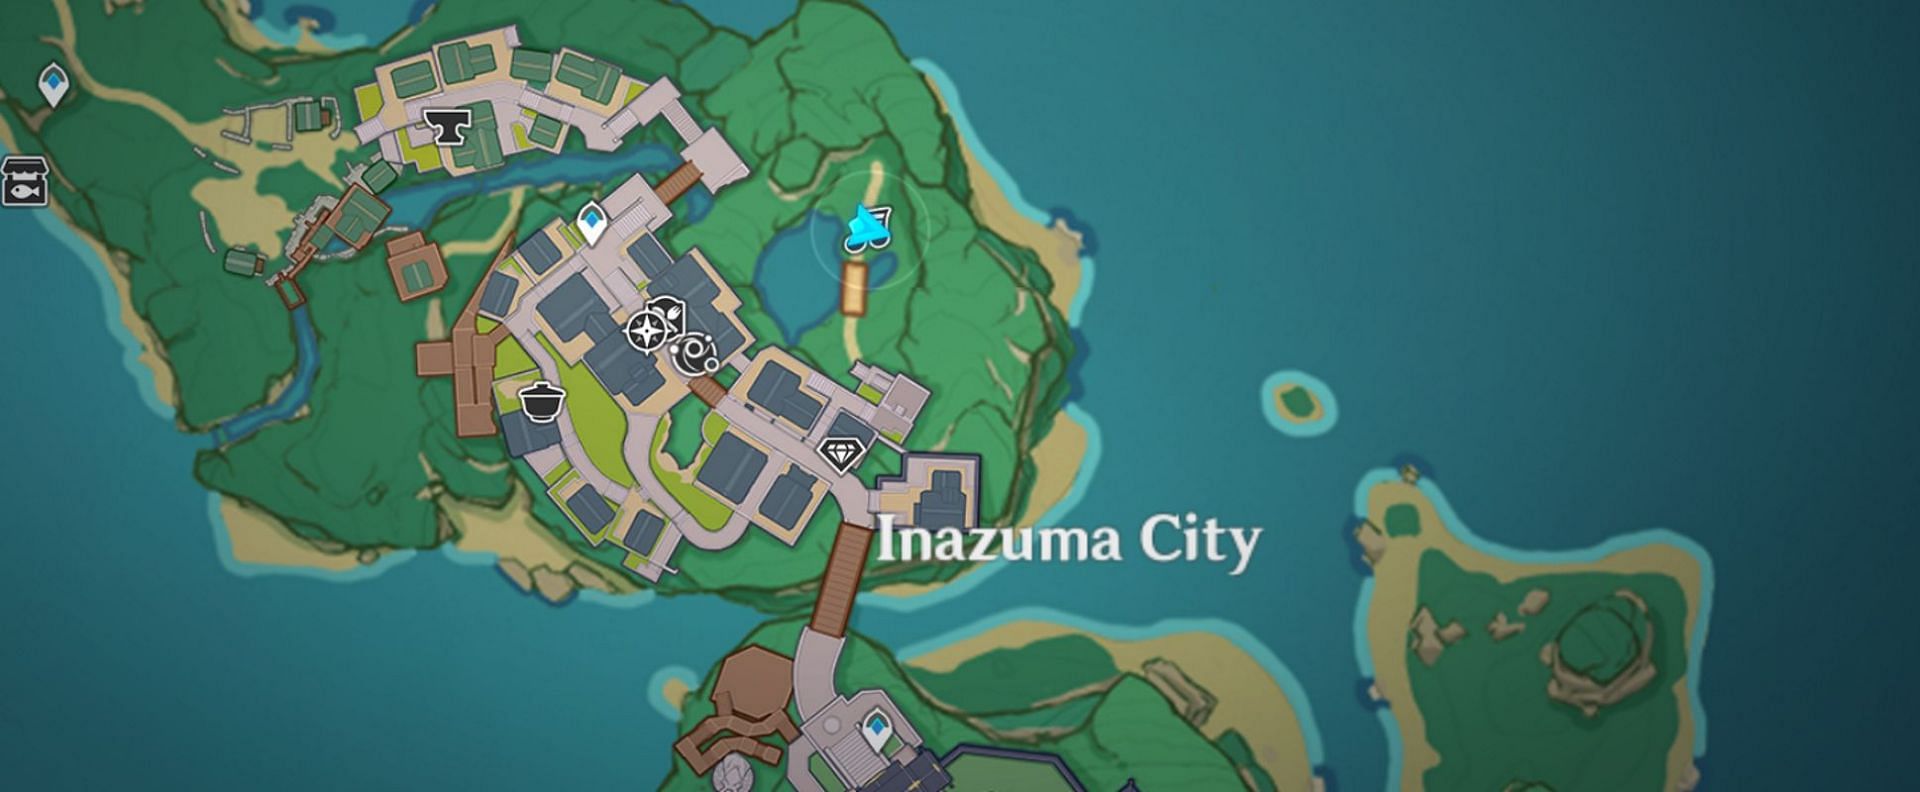 This performance is marked on the map in this location (Image via Genshin Impact)